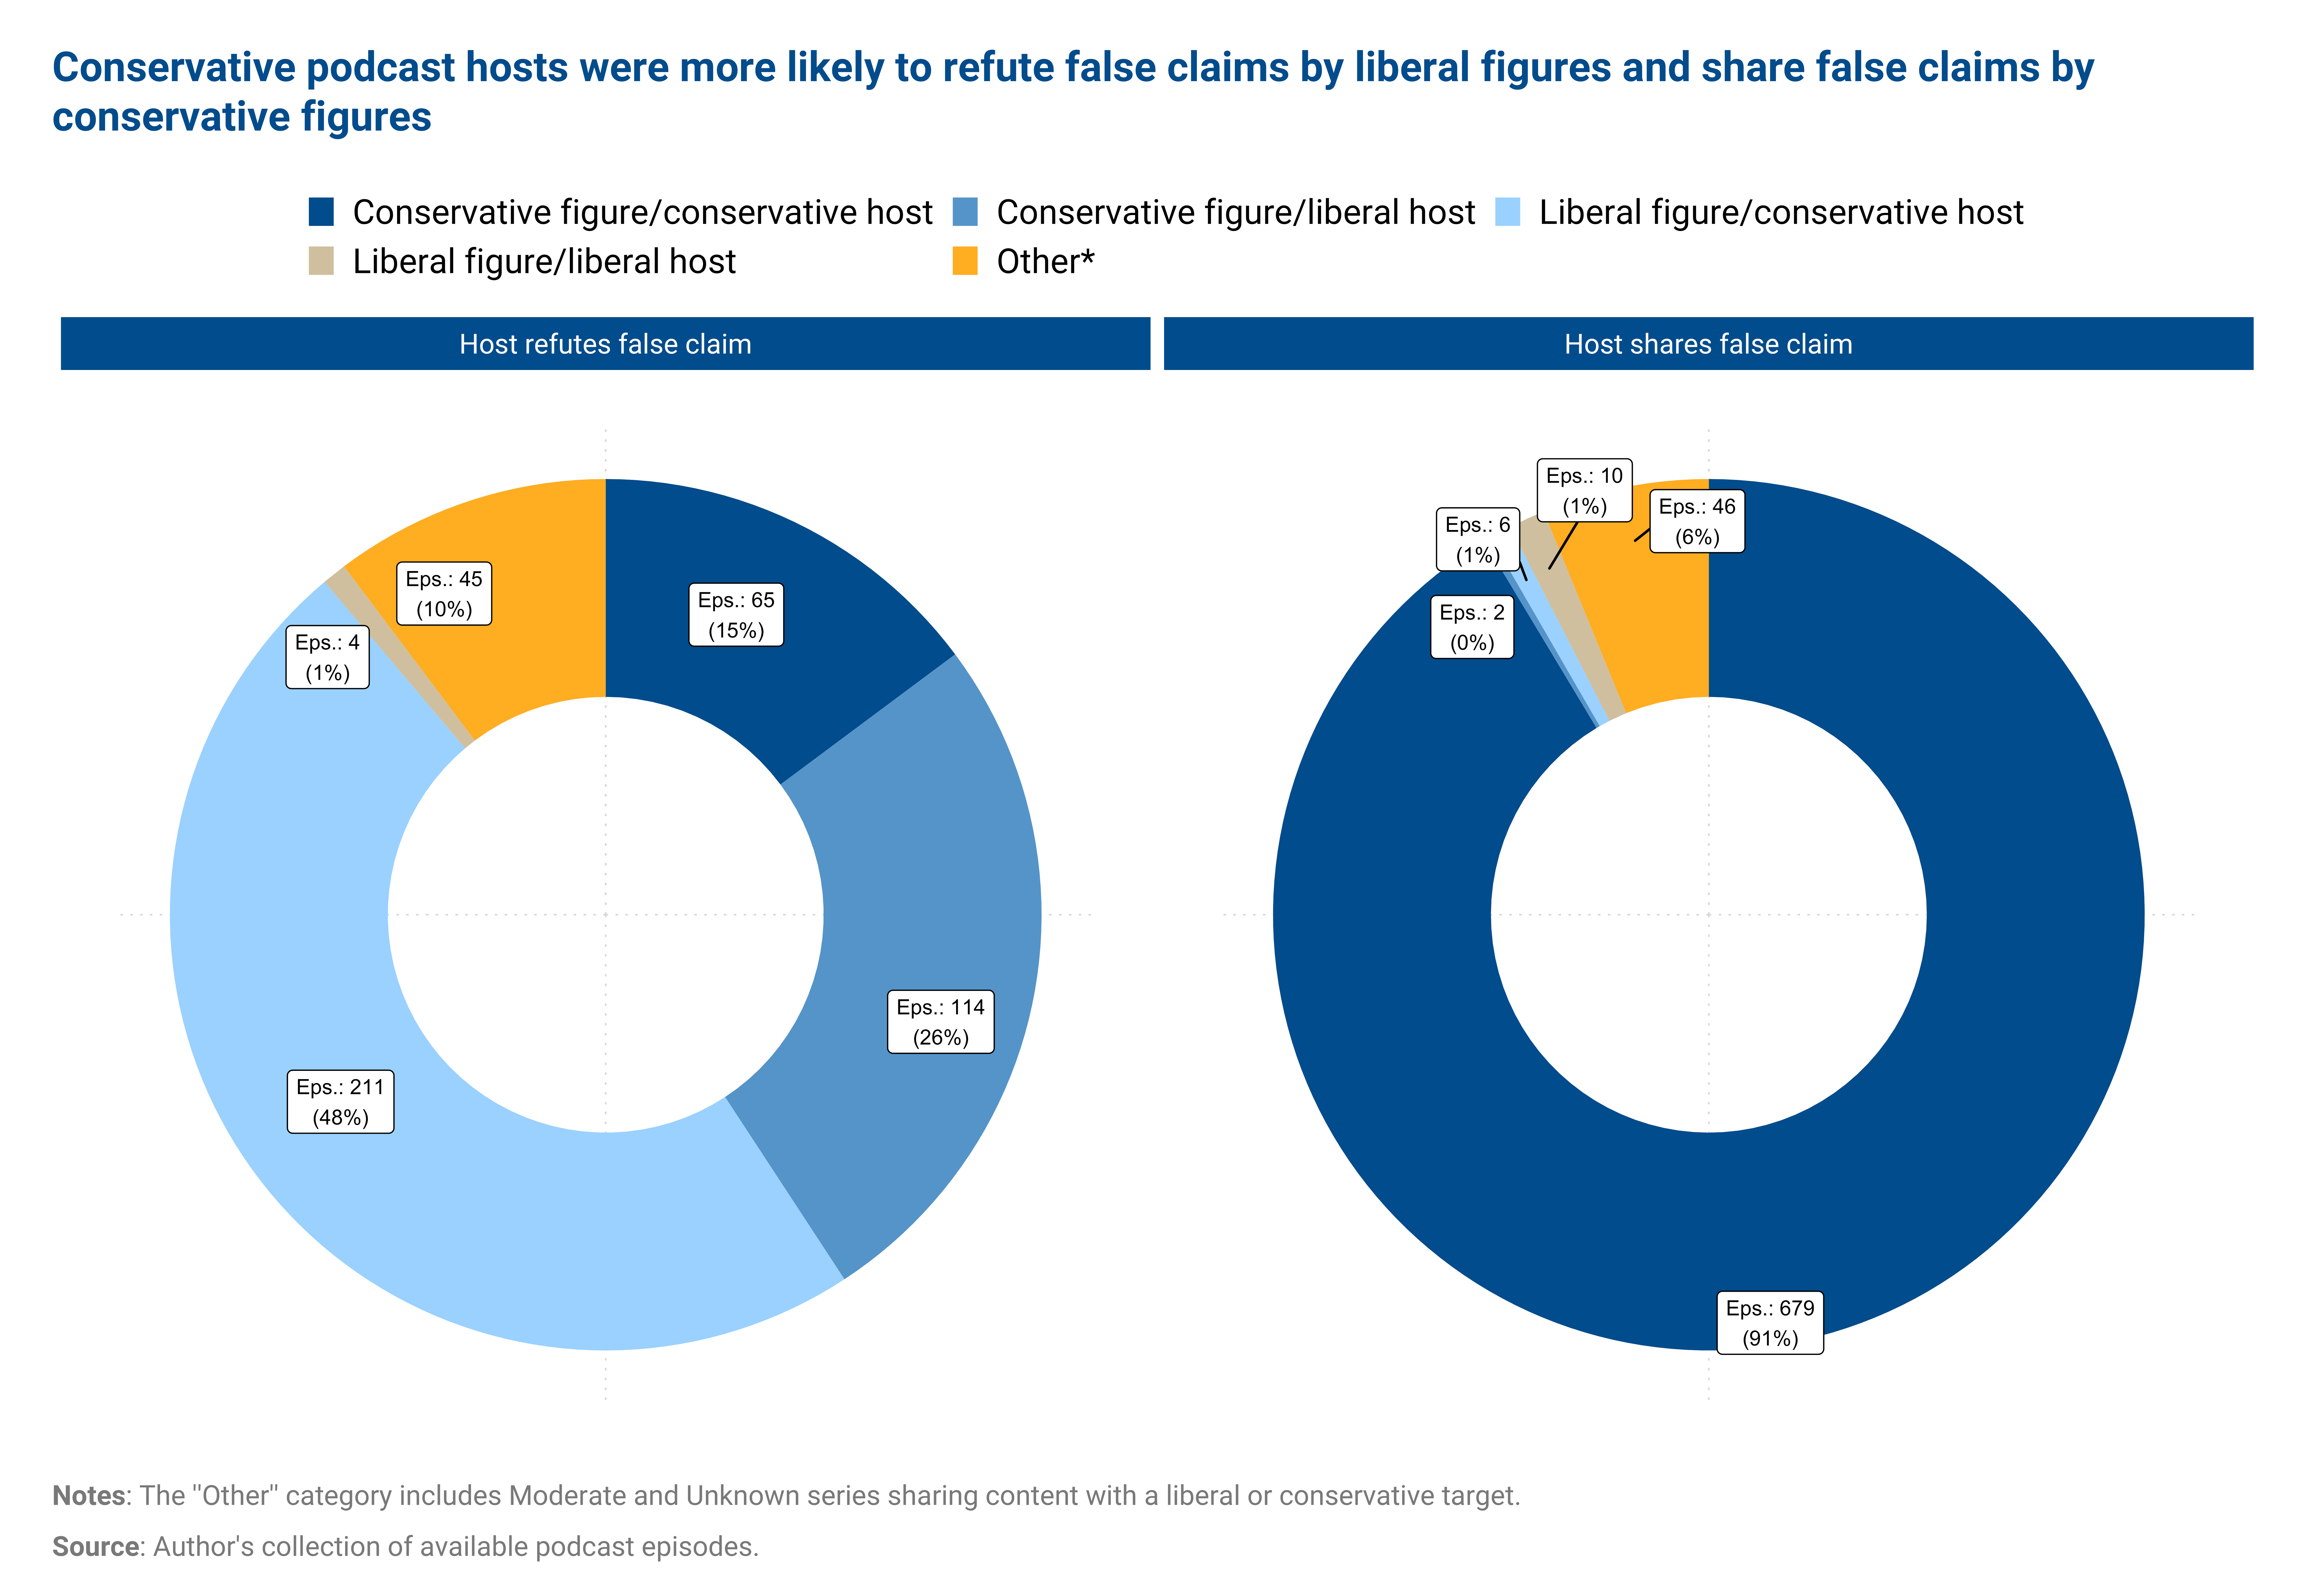 Figure: Podcasters shared false claims made by conservative figures 681 times and false claims made by liberal figures 16 times. Conservative podcast hosts were also more likely to refute false claims made by liberal figures.